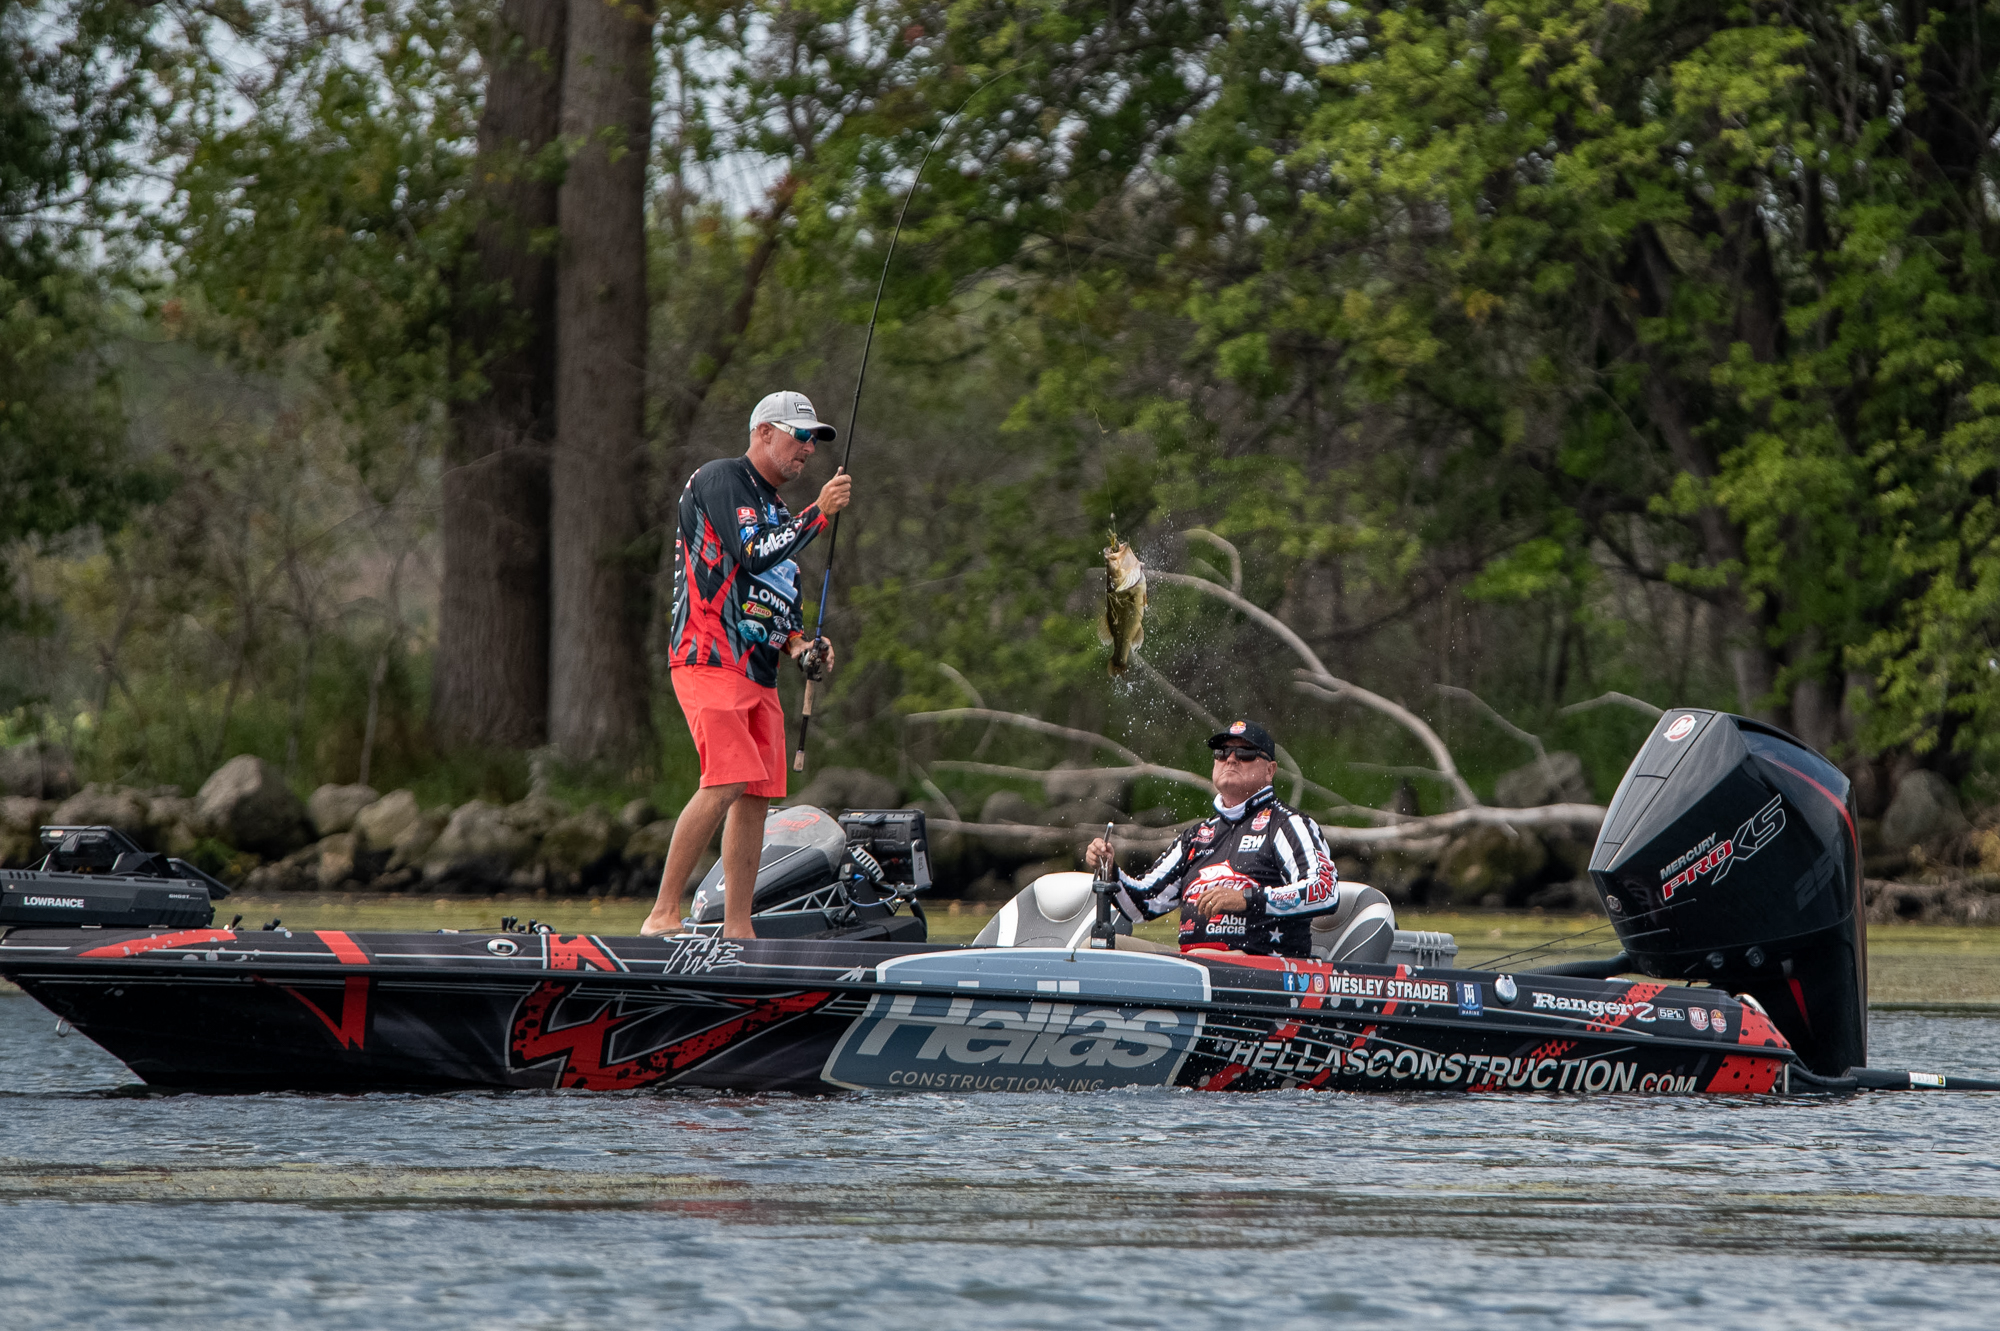 Wesley Strader Takes Early Group B Lead at Bass Pro Tour CarParts.com Stage  Seven at Lake St. Clair Presented by Covercraft - Major League Fishing